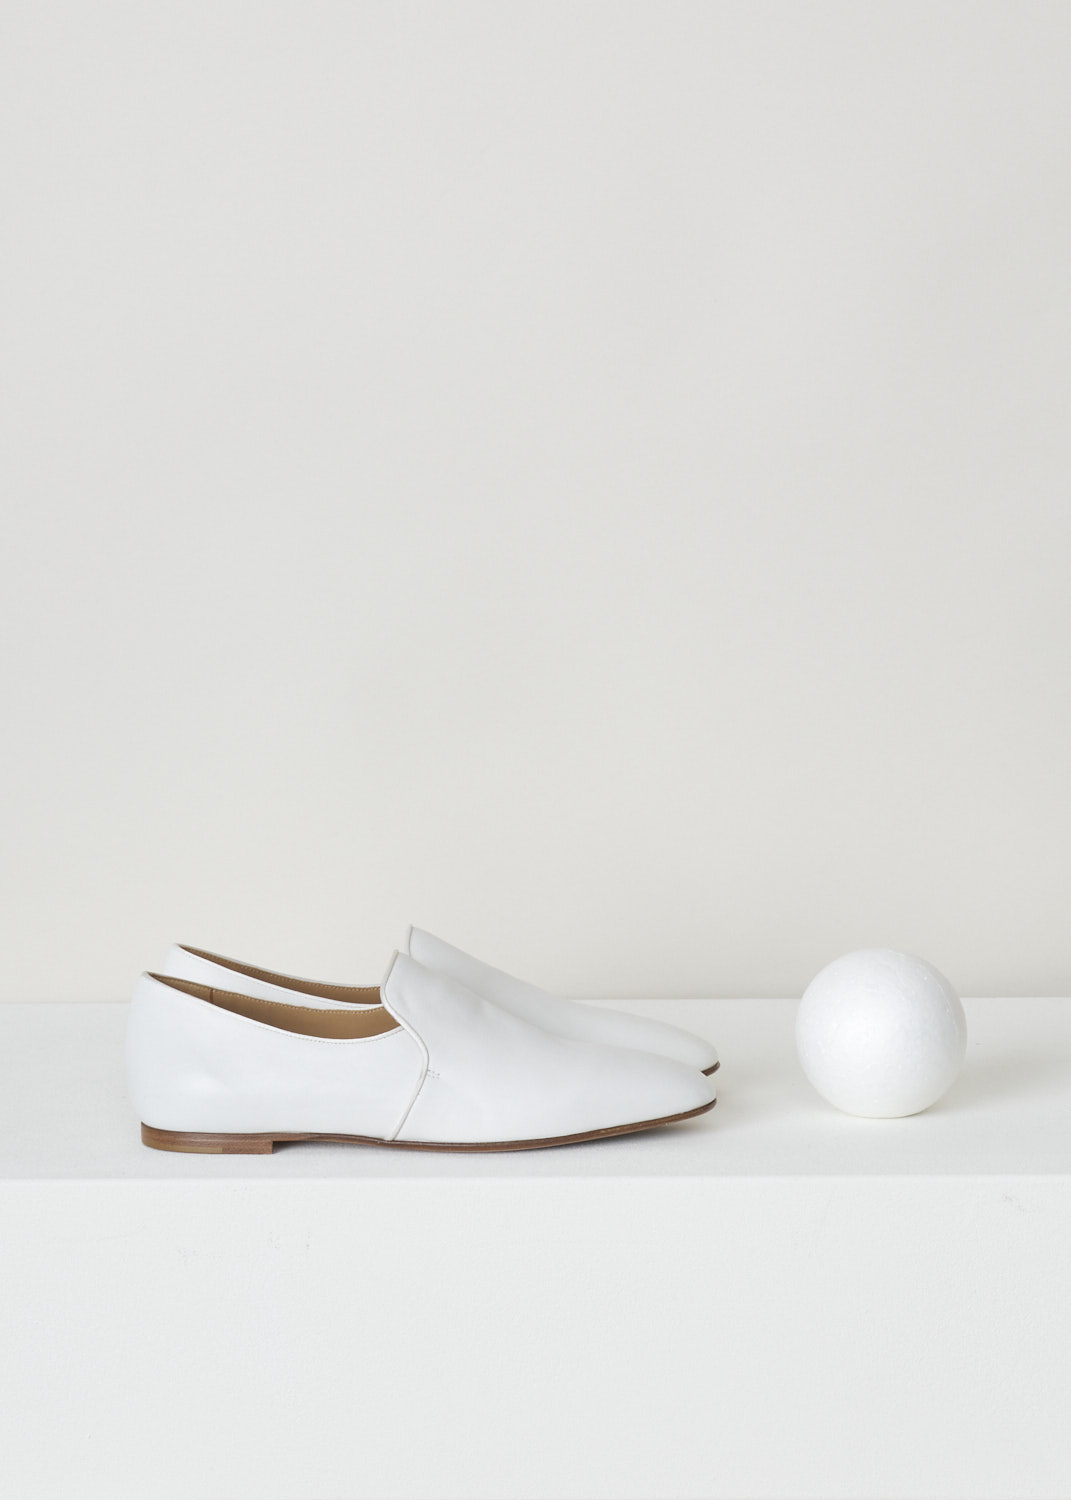 The Row, White leather alys slipper, F1005_L64_WHT, white, side, Made from a minimalist perspective, and crafted out of butter-soft calfskin. Featuring a rounded toe vamp and comes with white satin piping on the topline. The seamless lining ensures they can be worn with or without socks.
